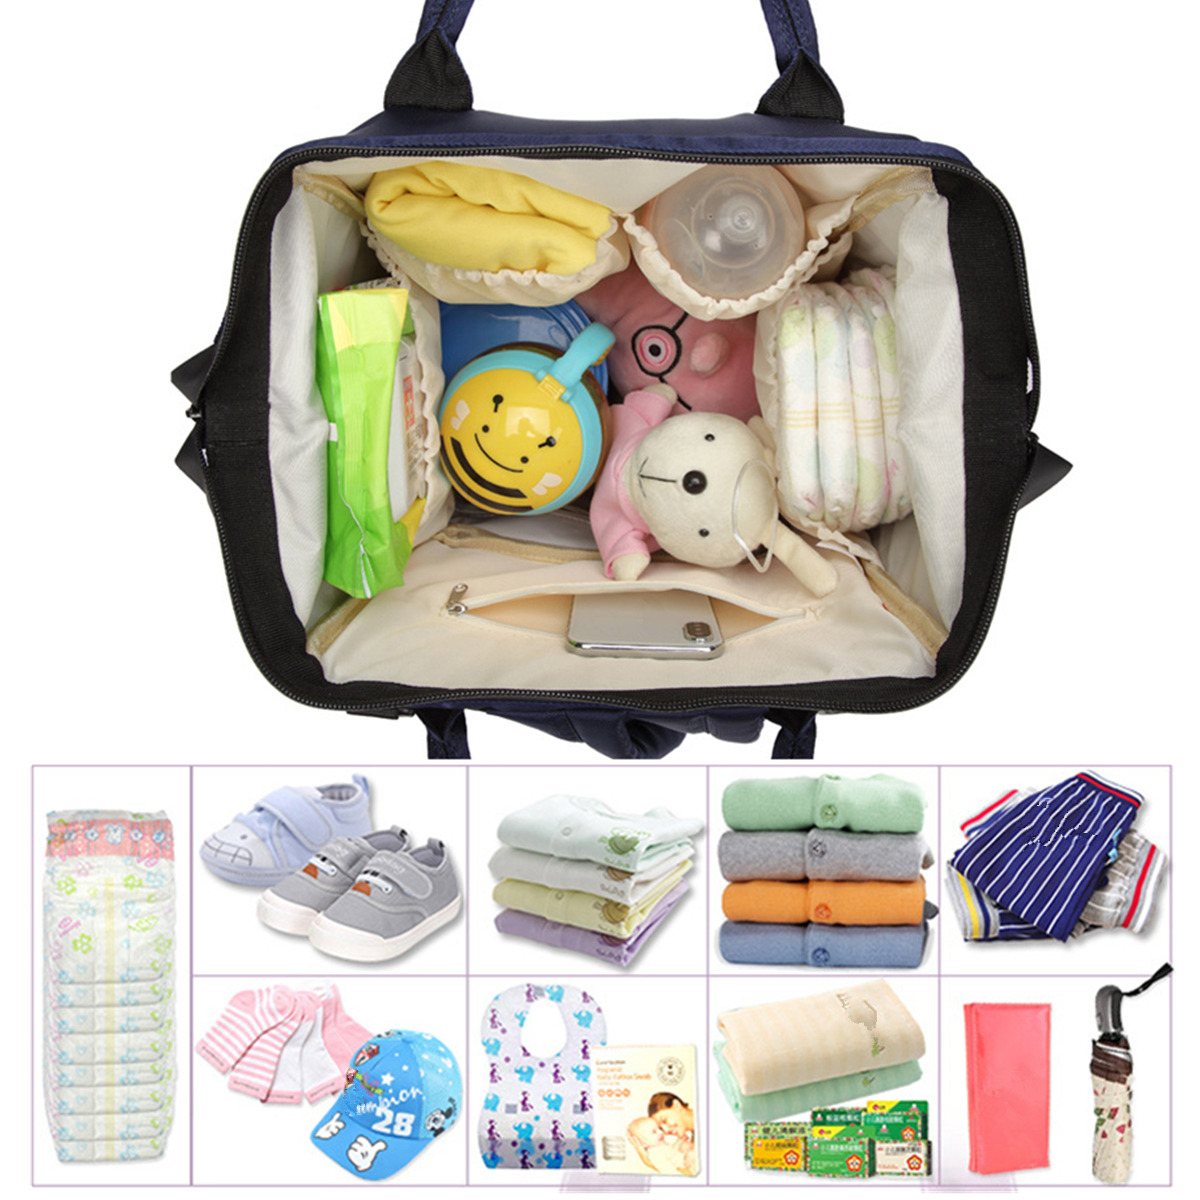 16L-Outdoor-Travel-Mummy-Backpack-Rucksack-Large-Capacity-Baby-Nappy-Diapers-Storage-Bag-1414600-4